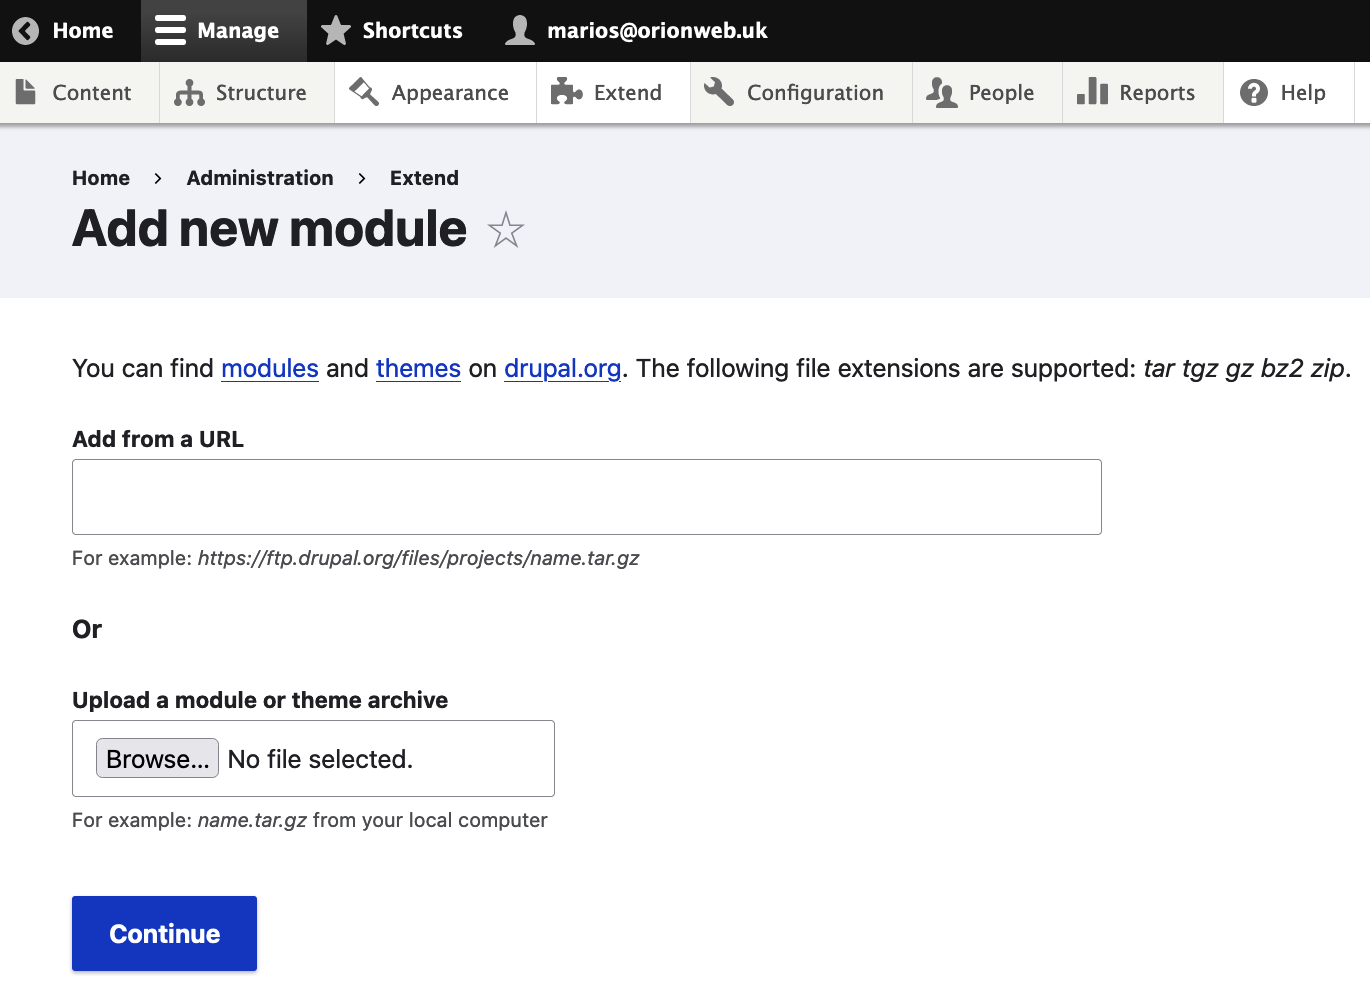 Adding a new Drupal module in the back office